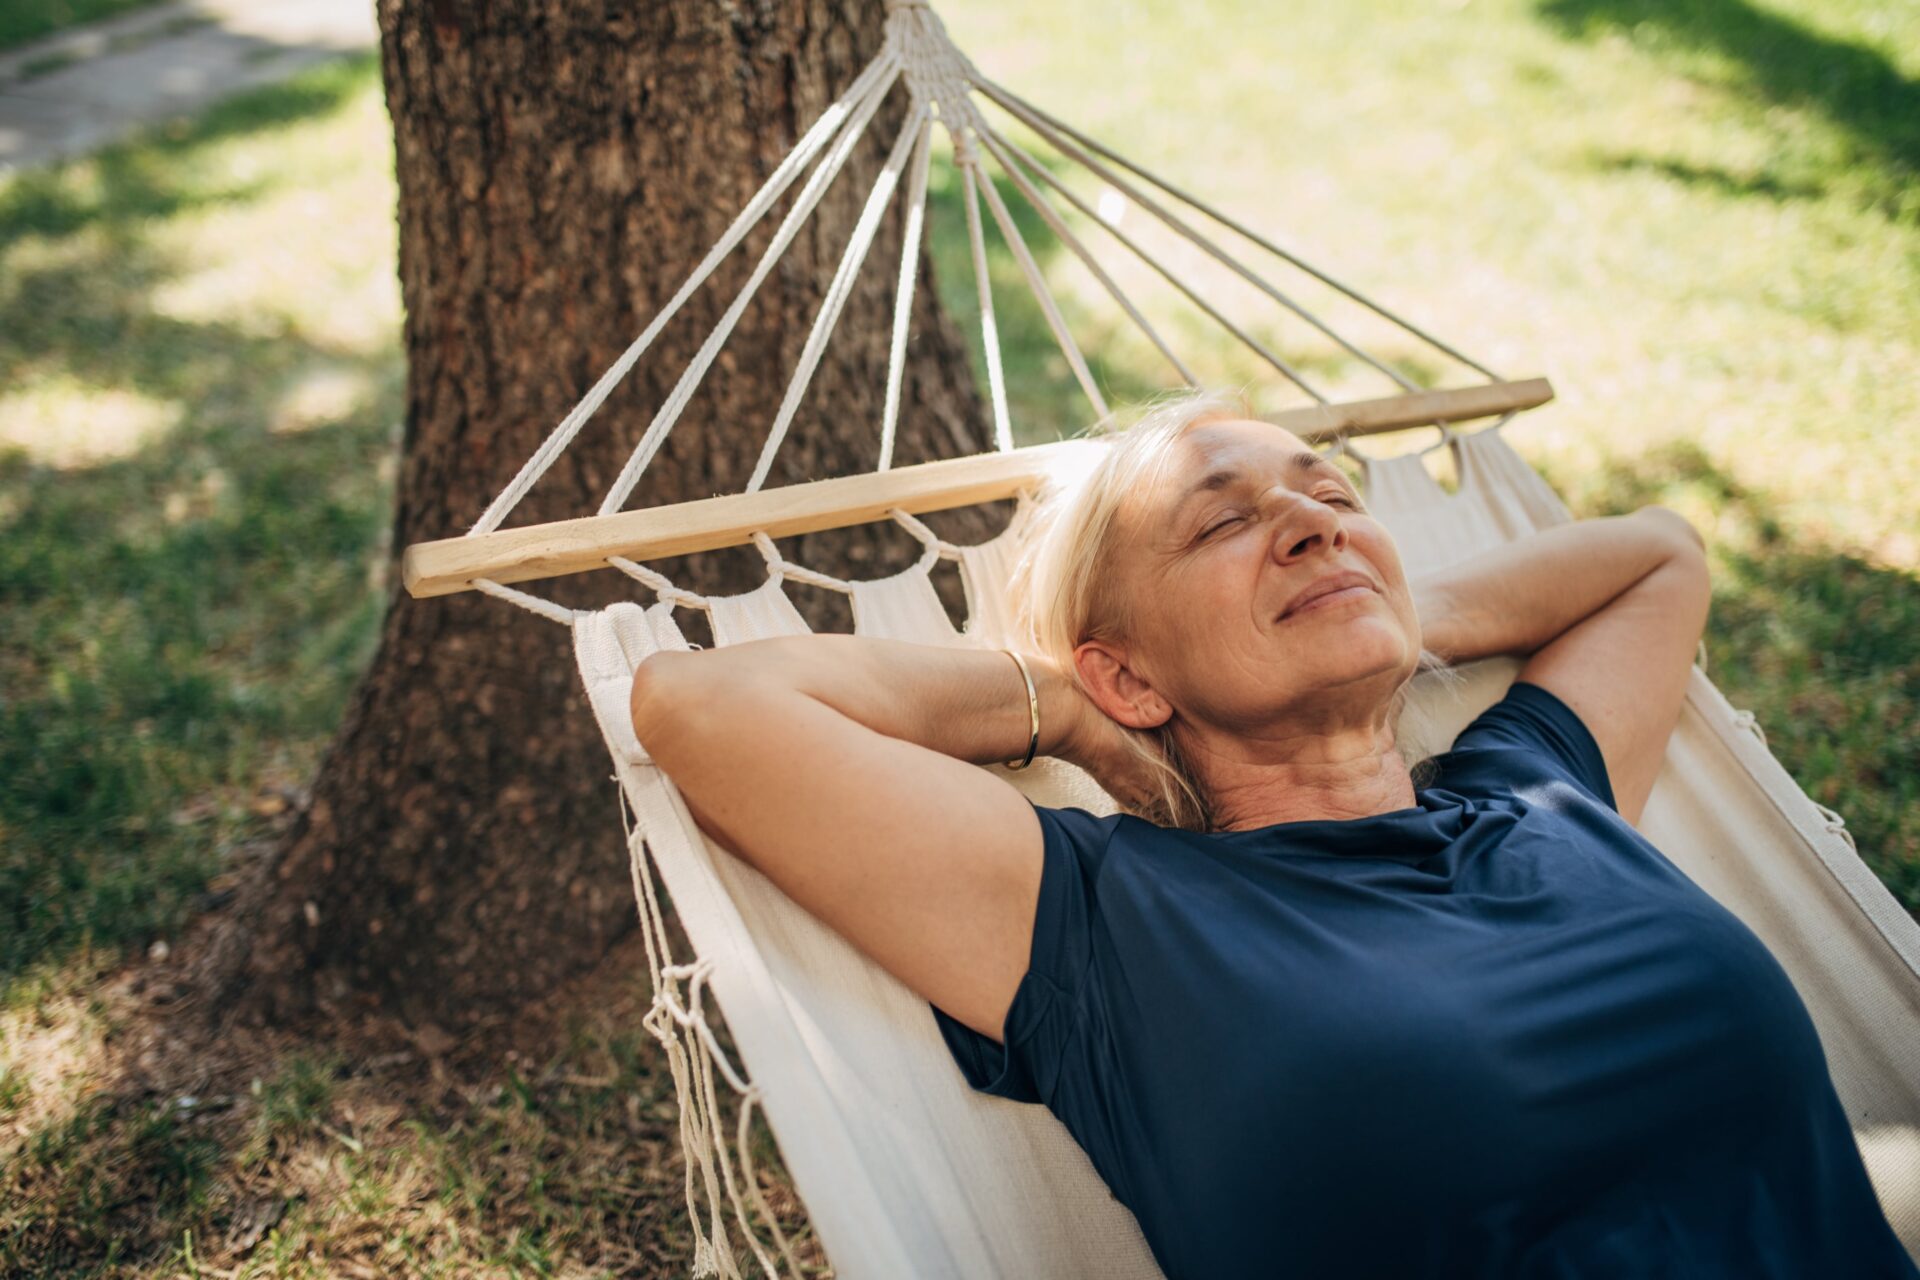 An older woman relaxing on a hammock outside in the sun with her eyes closed.